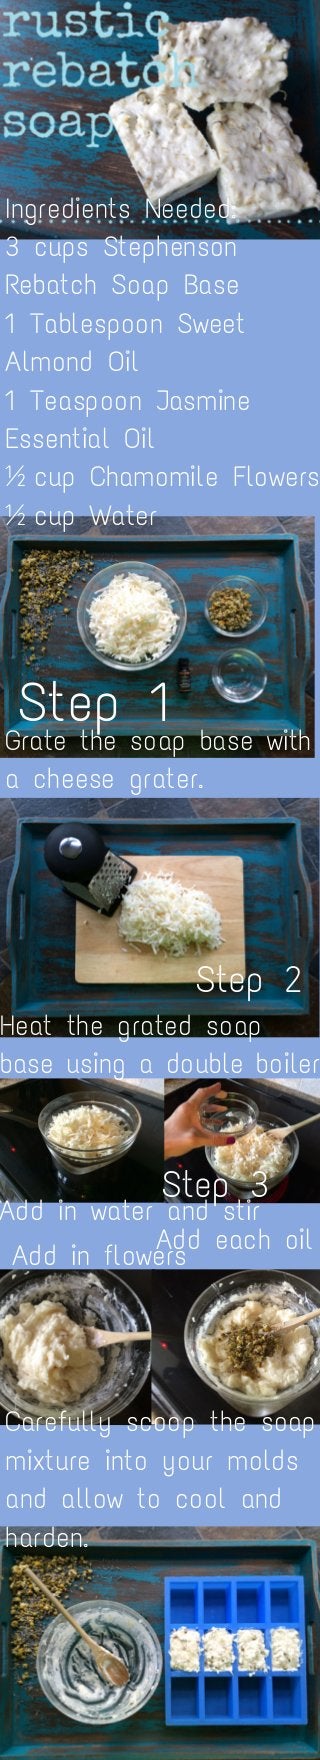 Ingredients Needed:
3 cups Stephenson
Rebatch Soap Base
1 Tablespoon Sweet
Almond Oil
1 Teaspoon Jasmine
Essential Oil
½ cup Chamomile Flowers
½ cup Water
Step 1
Grate the soap base with
a cheese grater.
Step 2
Heat the grated soap
base using a double boiler
Step 3
Add in water and stir
Add in flowers
Add each oil
Carefully scoop the soap
mixture into your molds
and allow to cool and
harden.
 